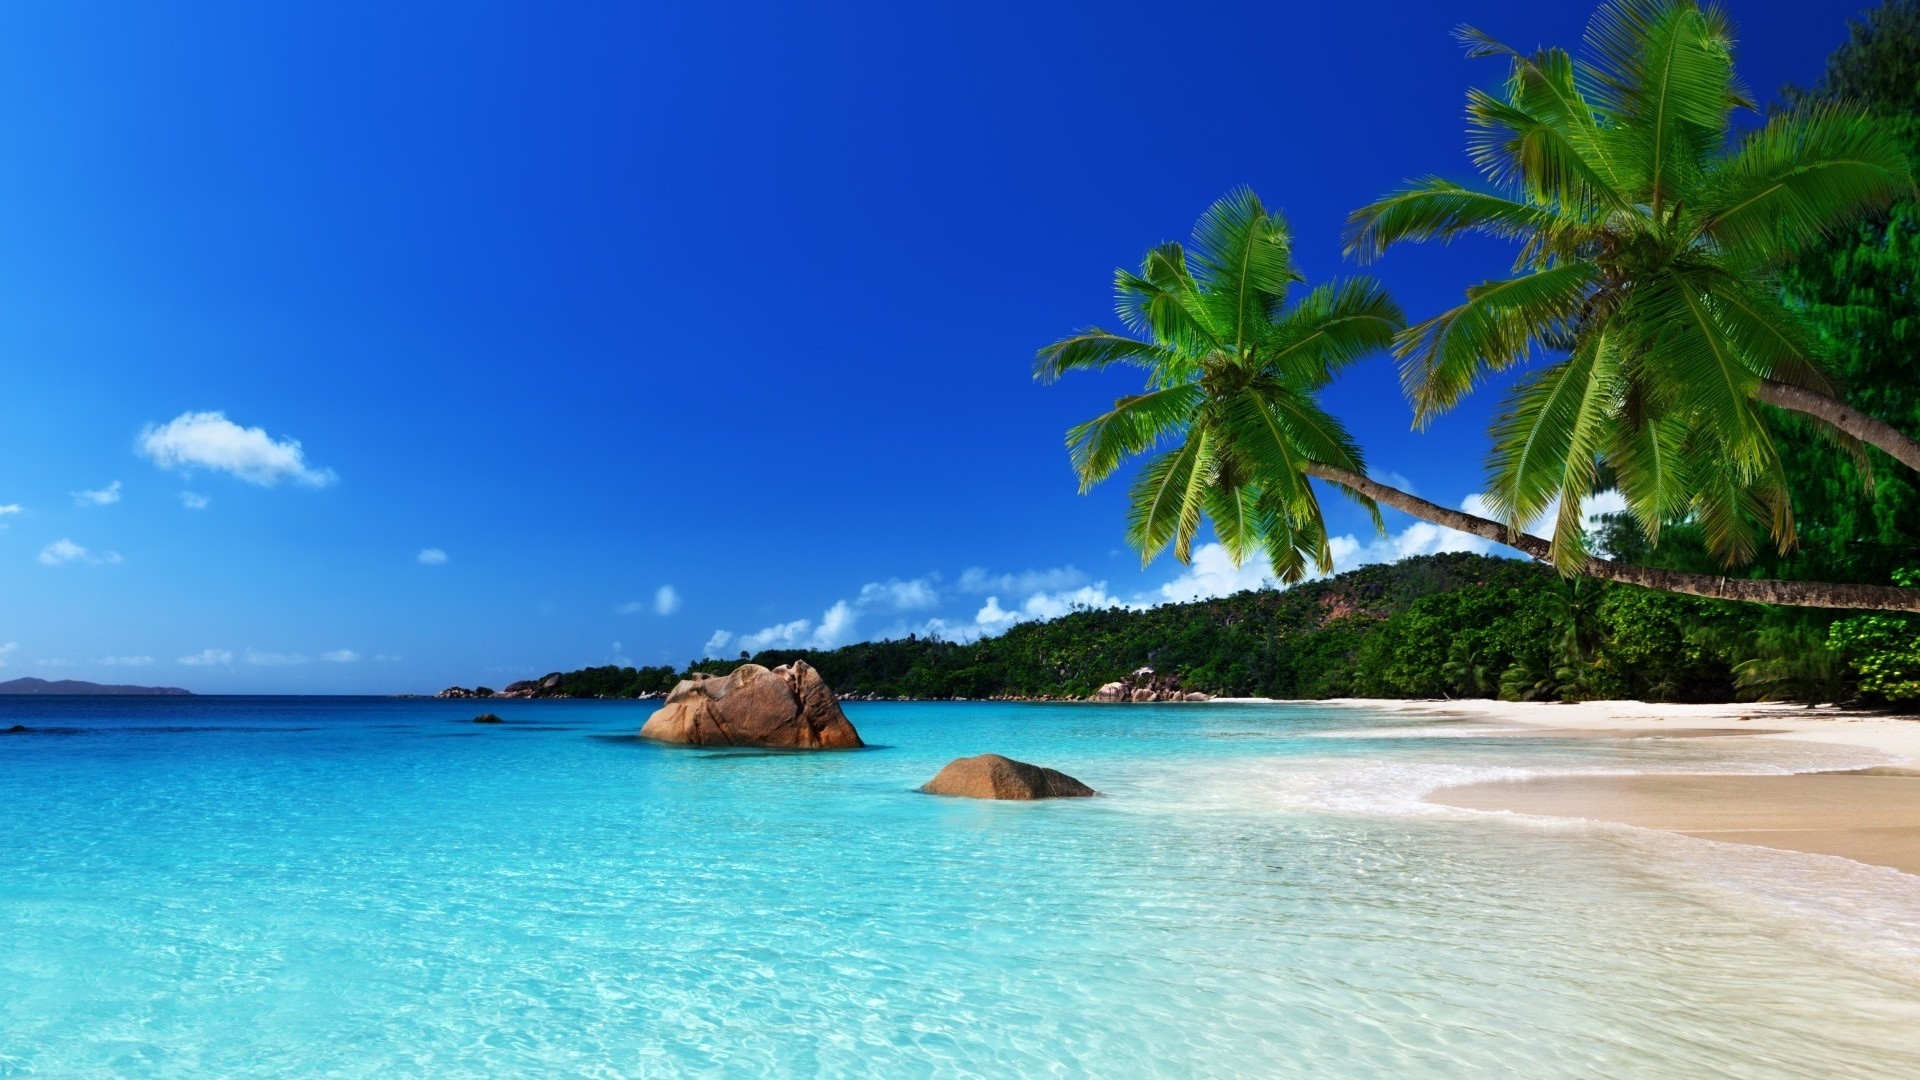 Tropical Island Landscape for 1920 x 1080 HDTV 1080p resolution